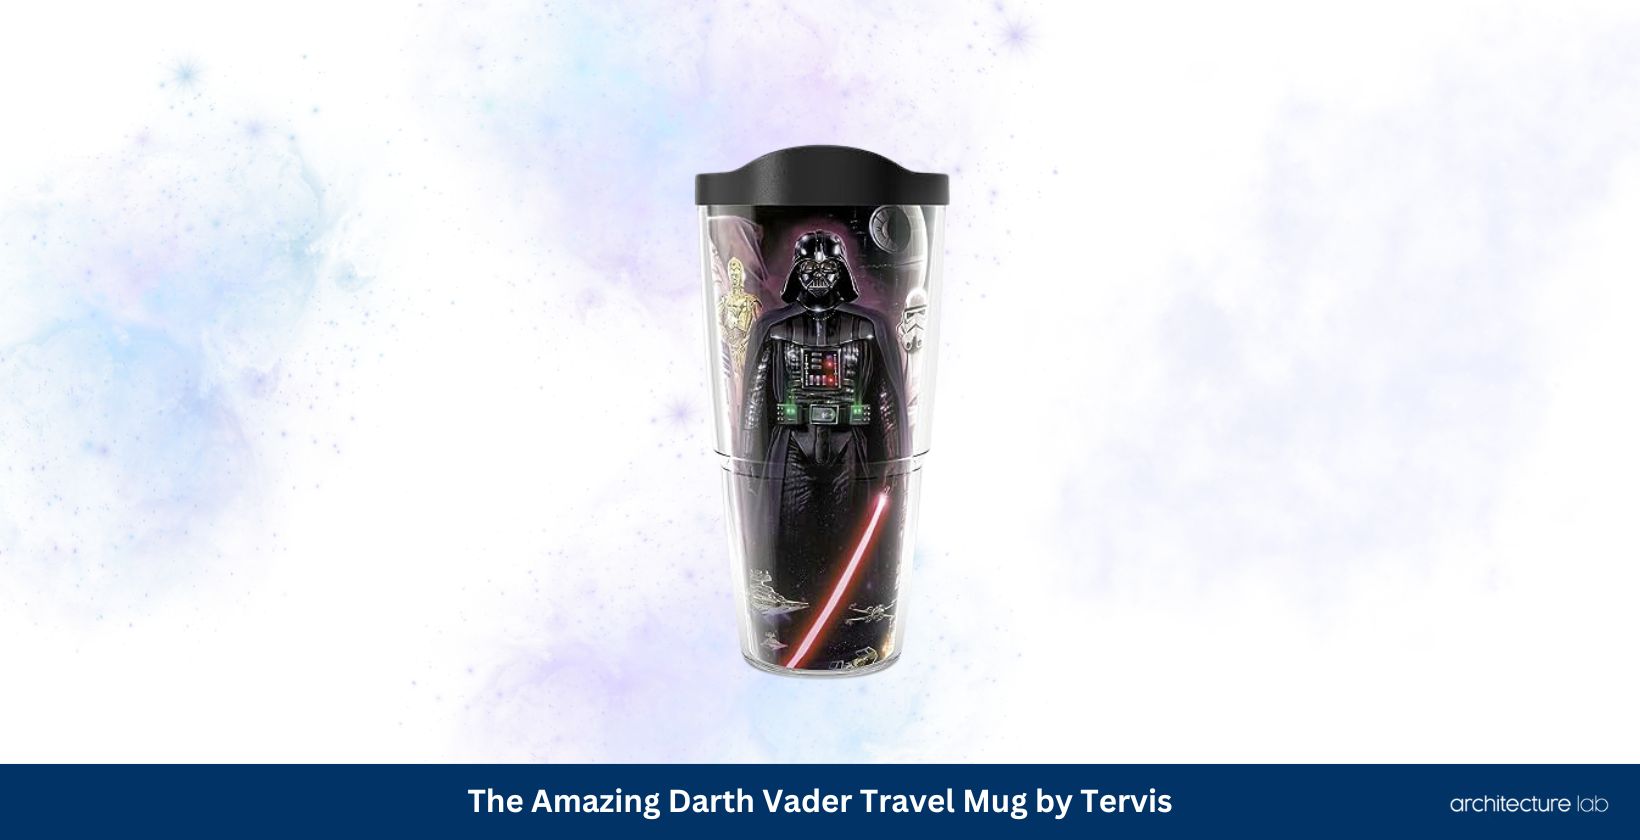 The amazing darth vader travel mug by tervis